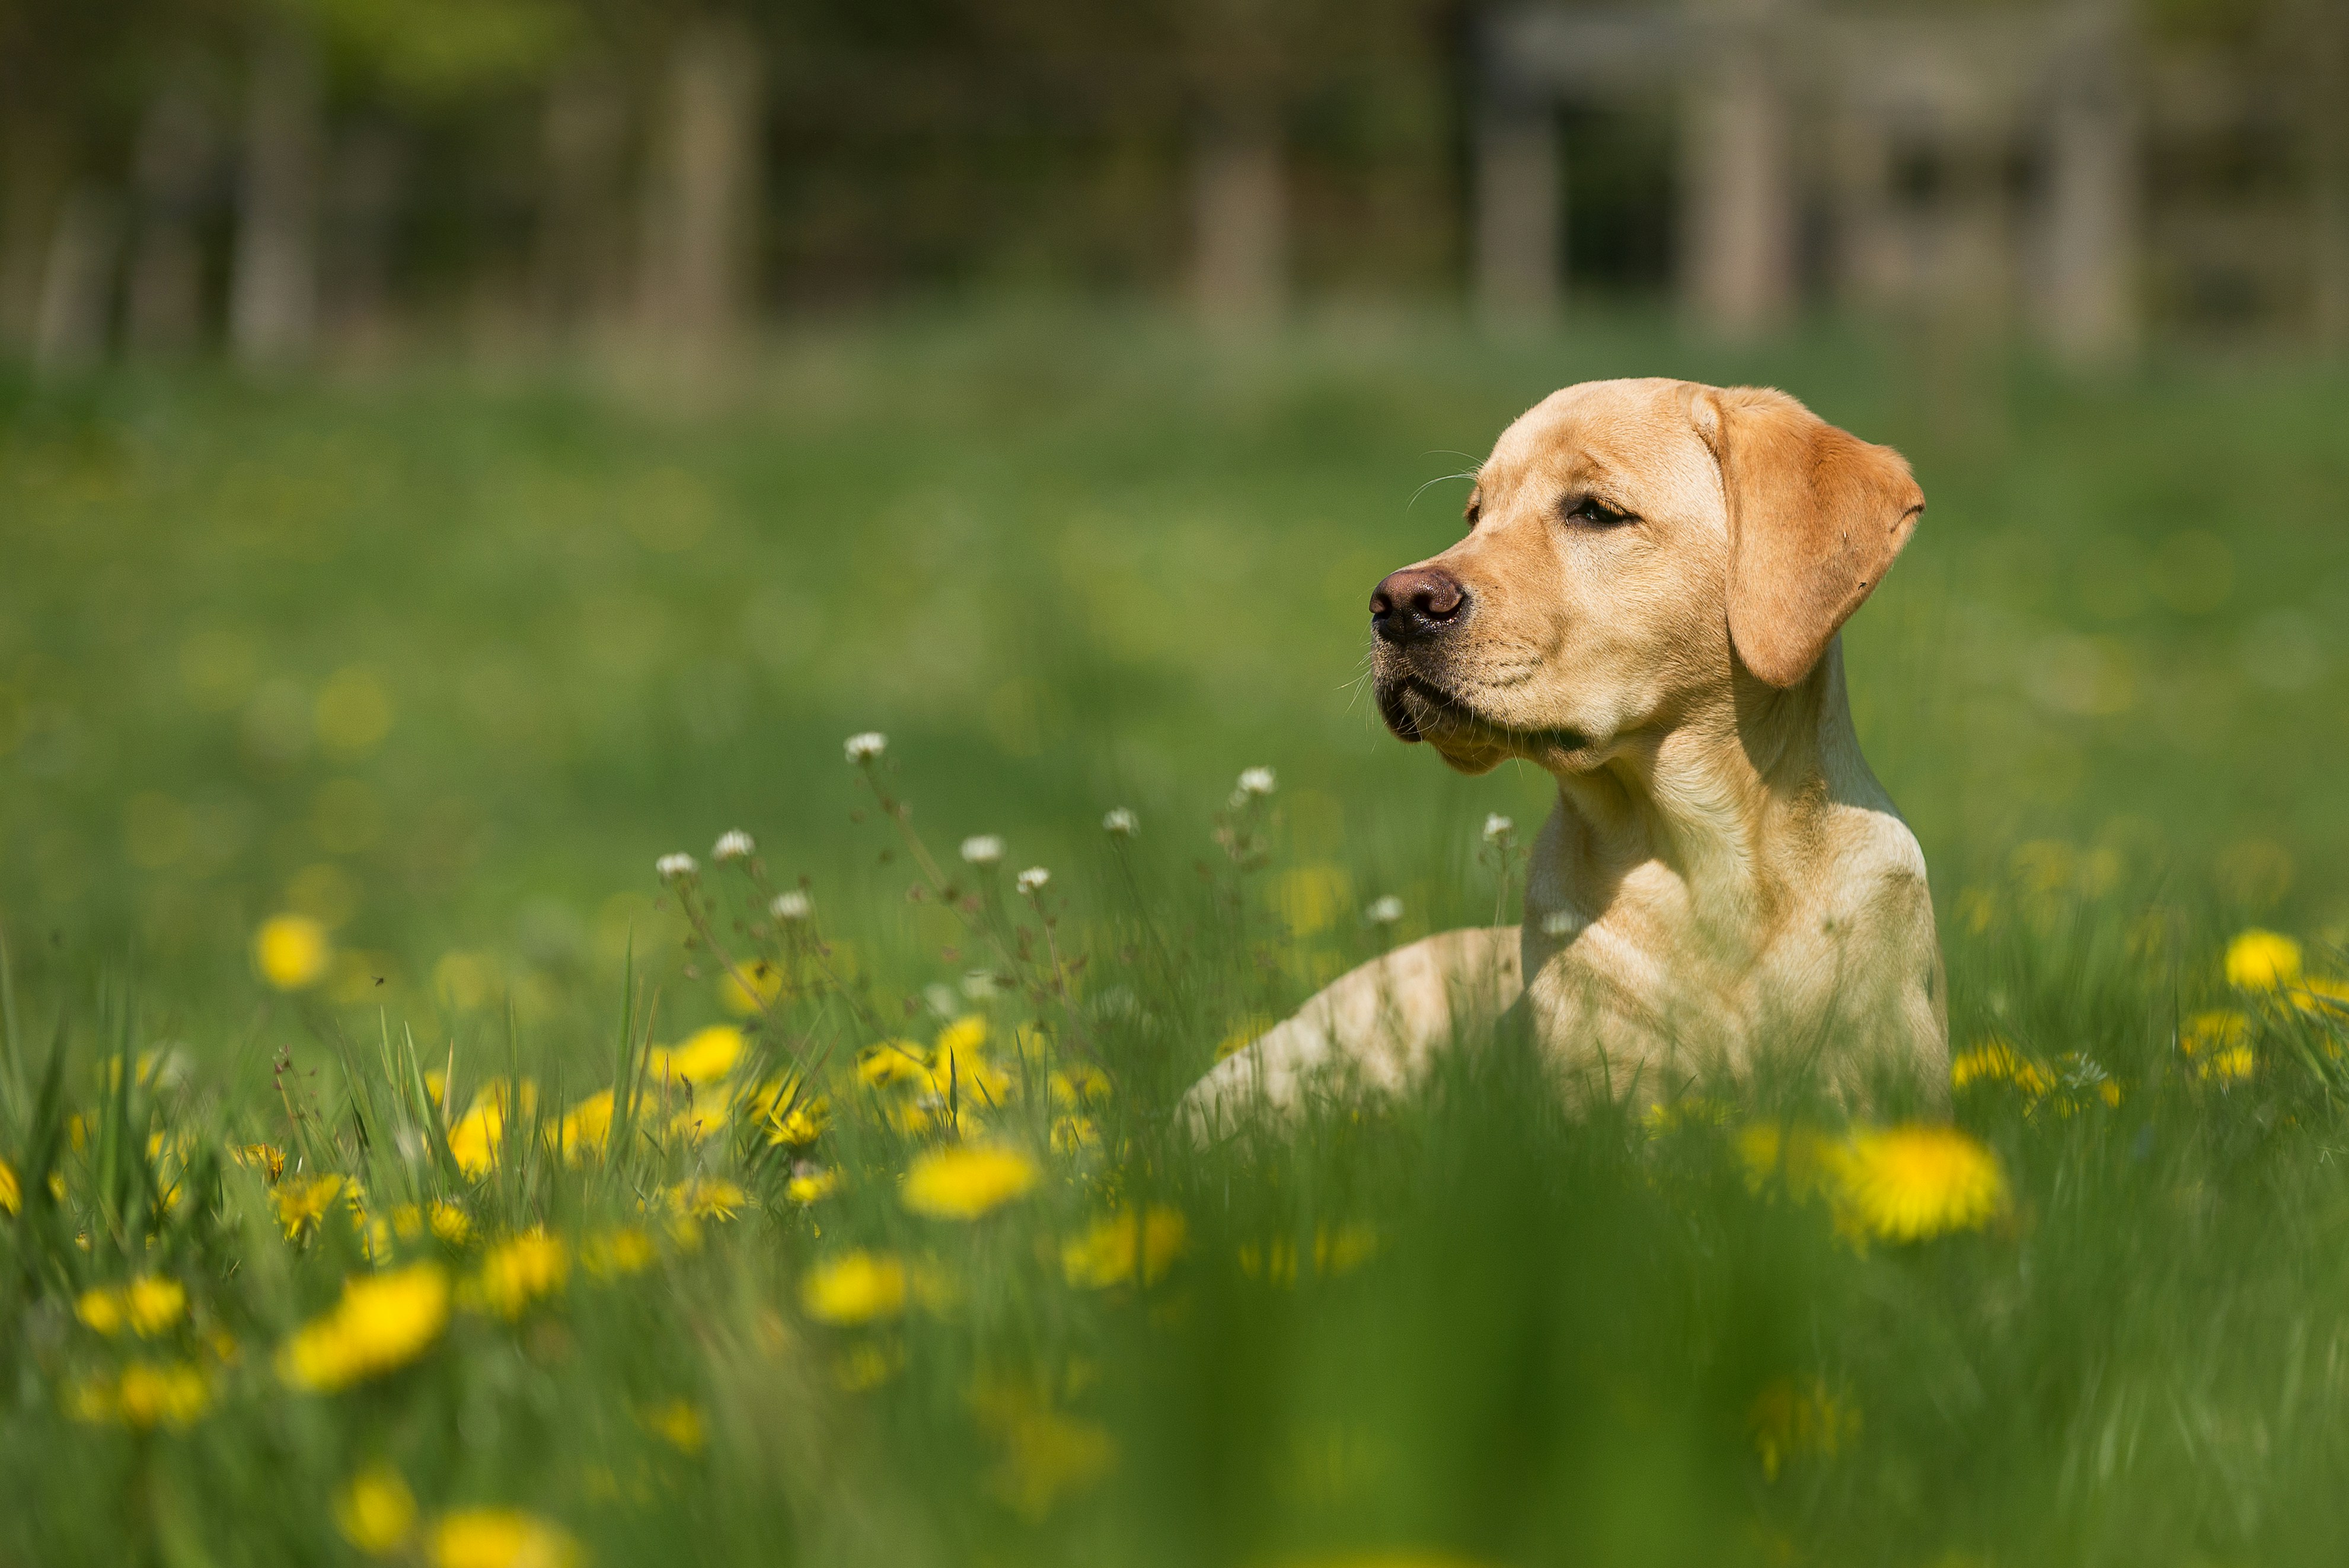 Golden retriever puppy outside in long grass and dandelions